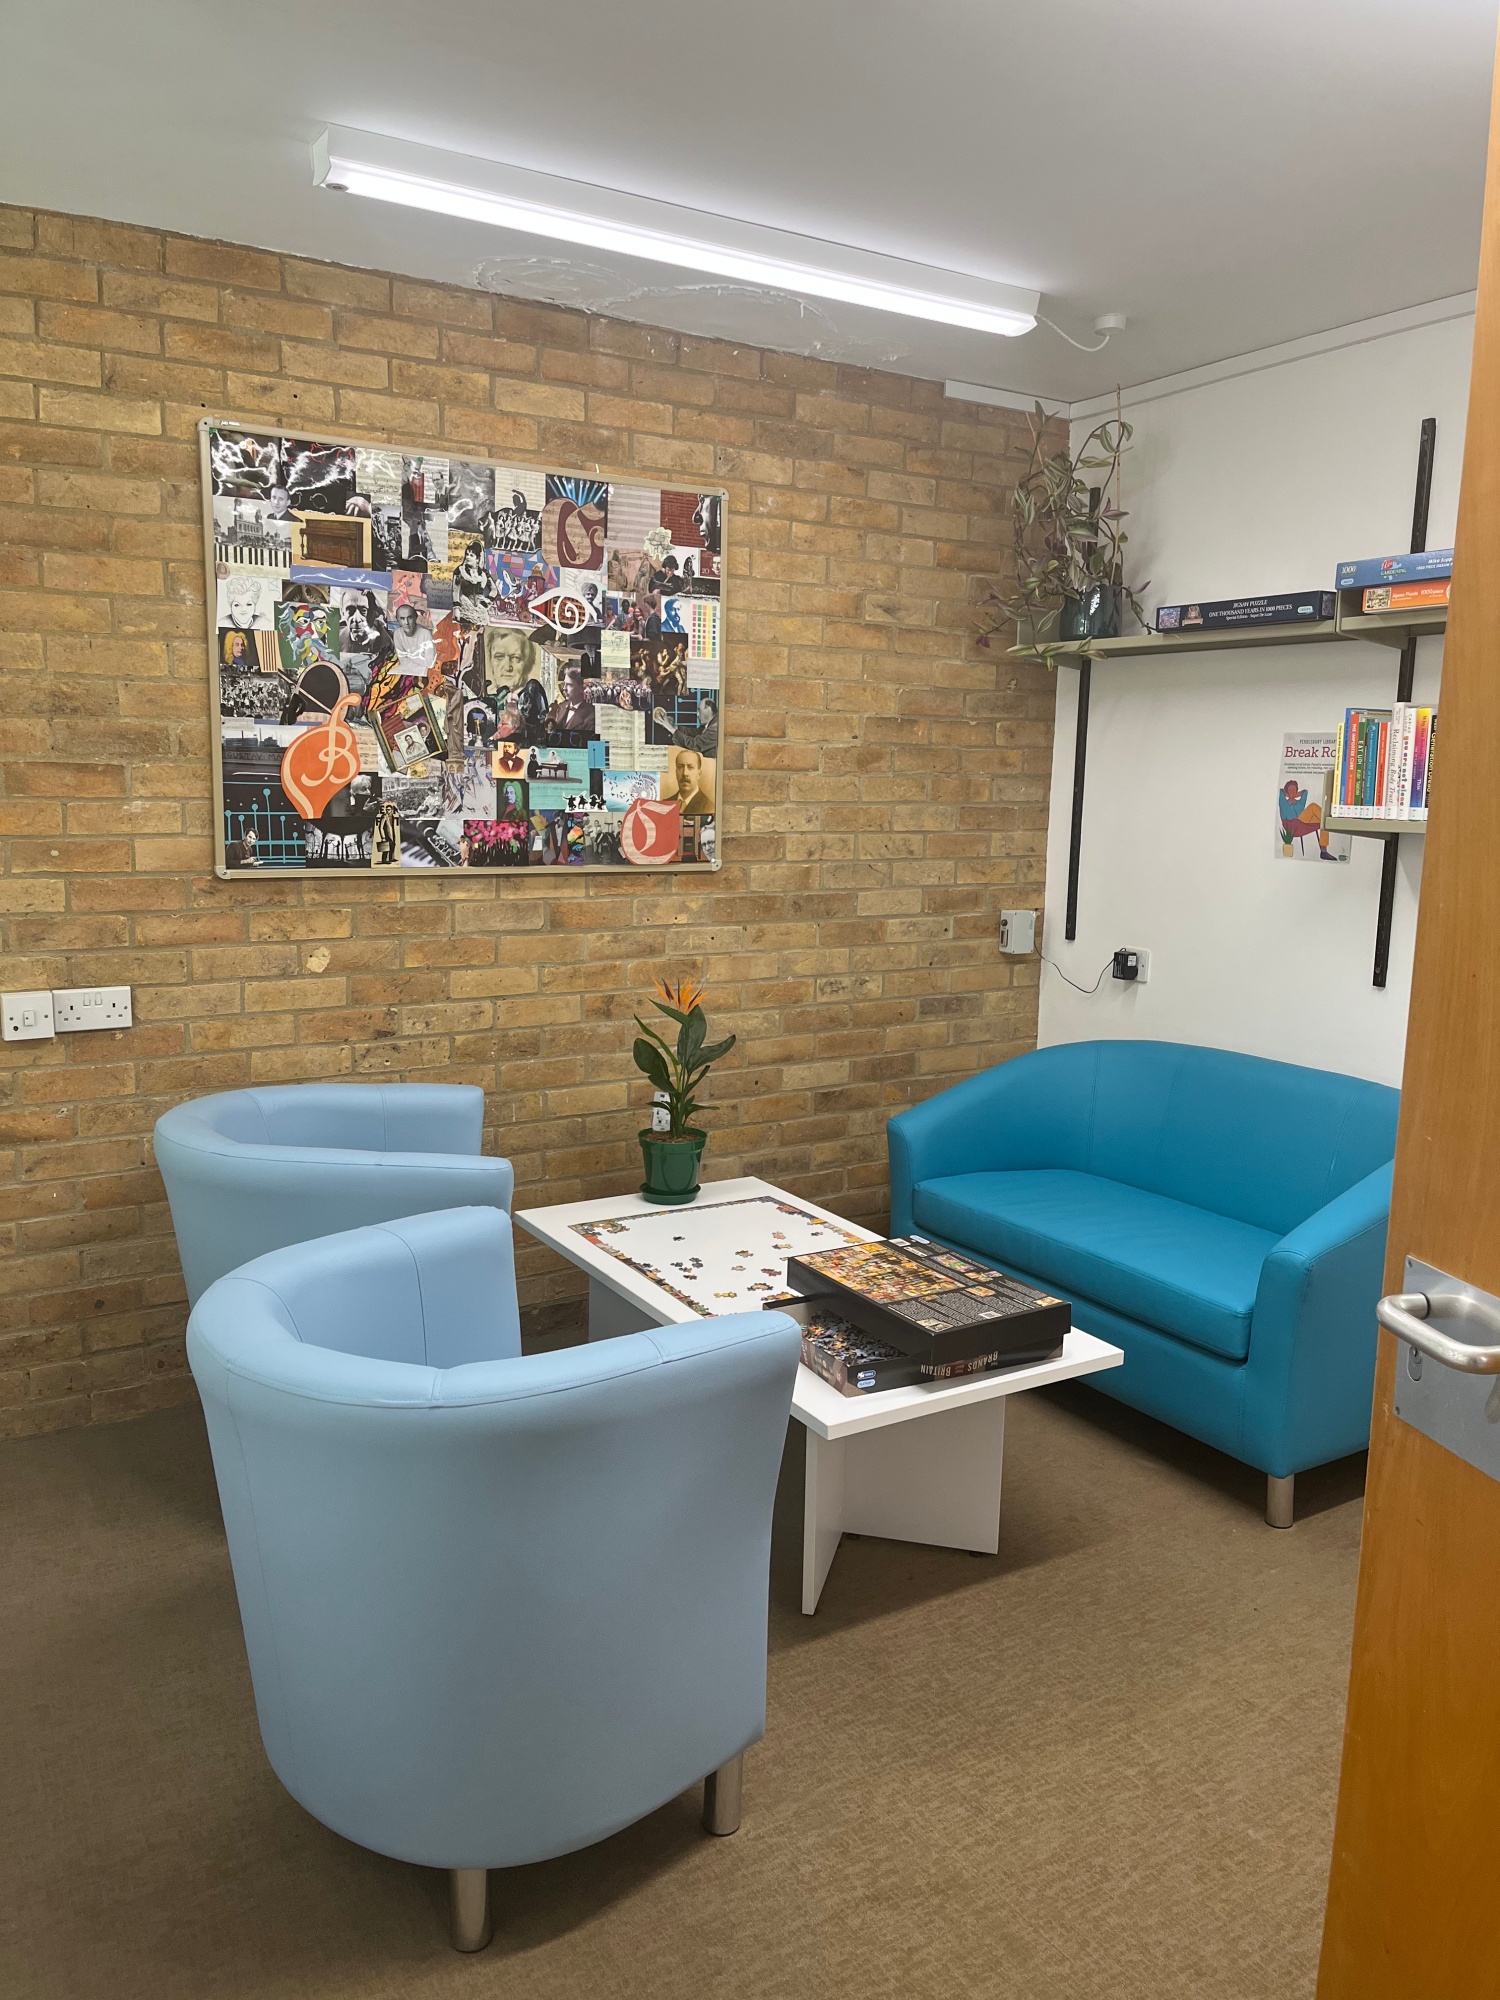 Photograph of library break room. Two light blue armchairs and a dark blue sofa surround a white coffee table with an unfinished puzzle and a potted plant on top. There is a large pinboard decorated with photos of composers on the brick wall at the back, and shelving with books on the right wall. 